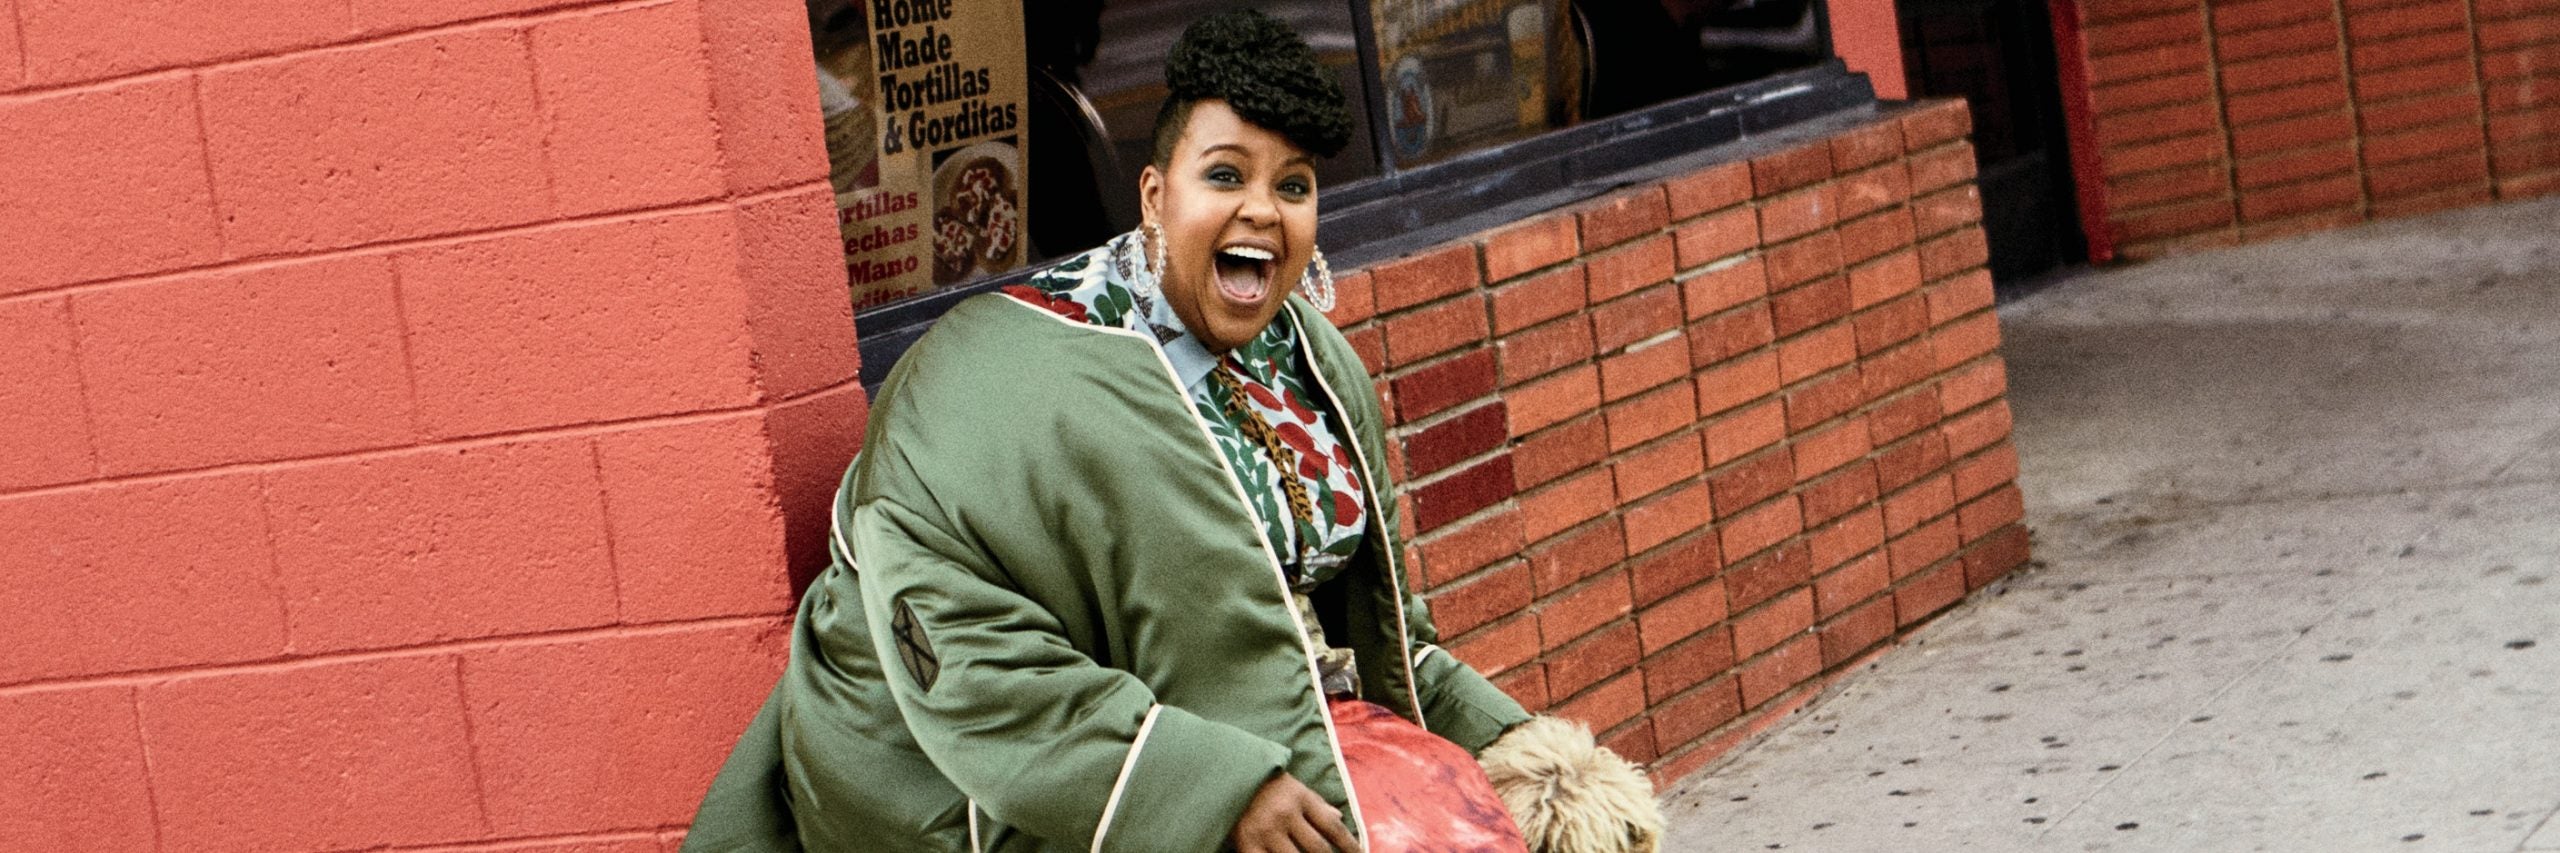 ‘Insecure’ Star Natasha Rothwell Is Ready To Tell Her Own Stories